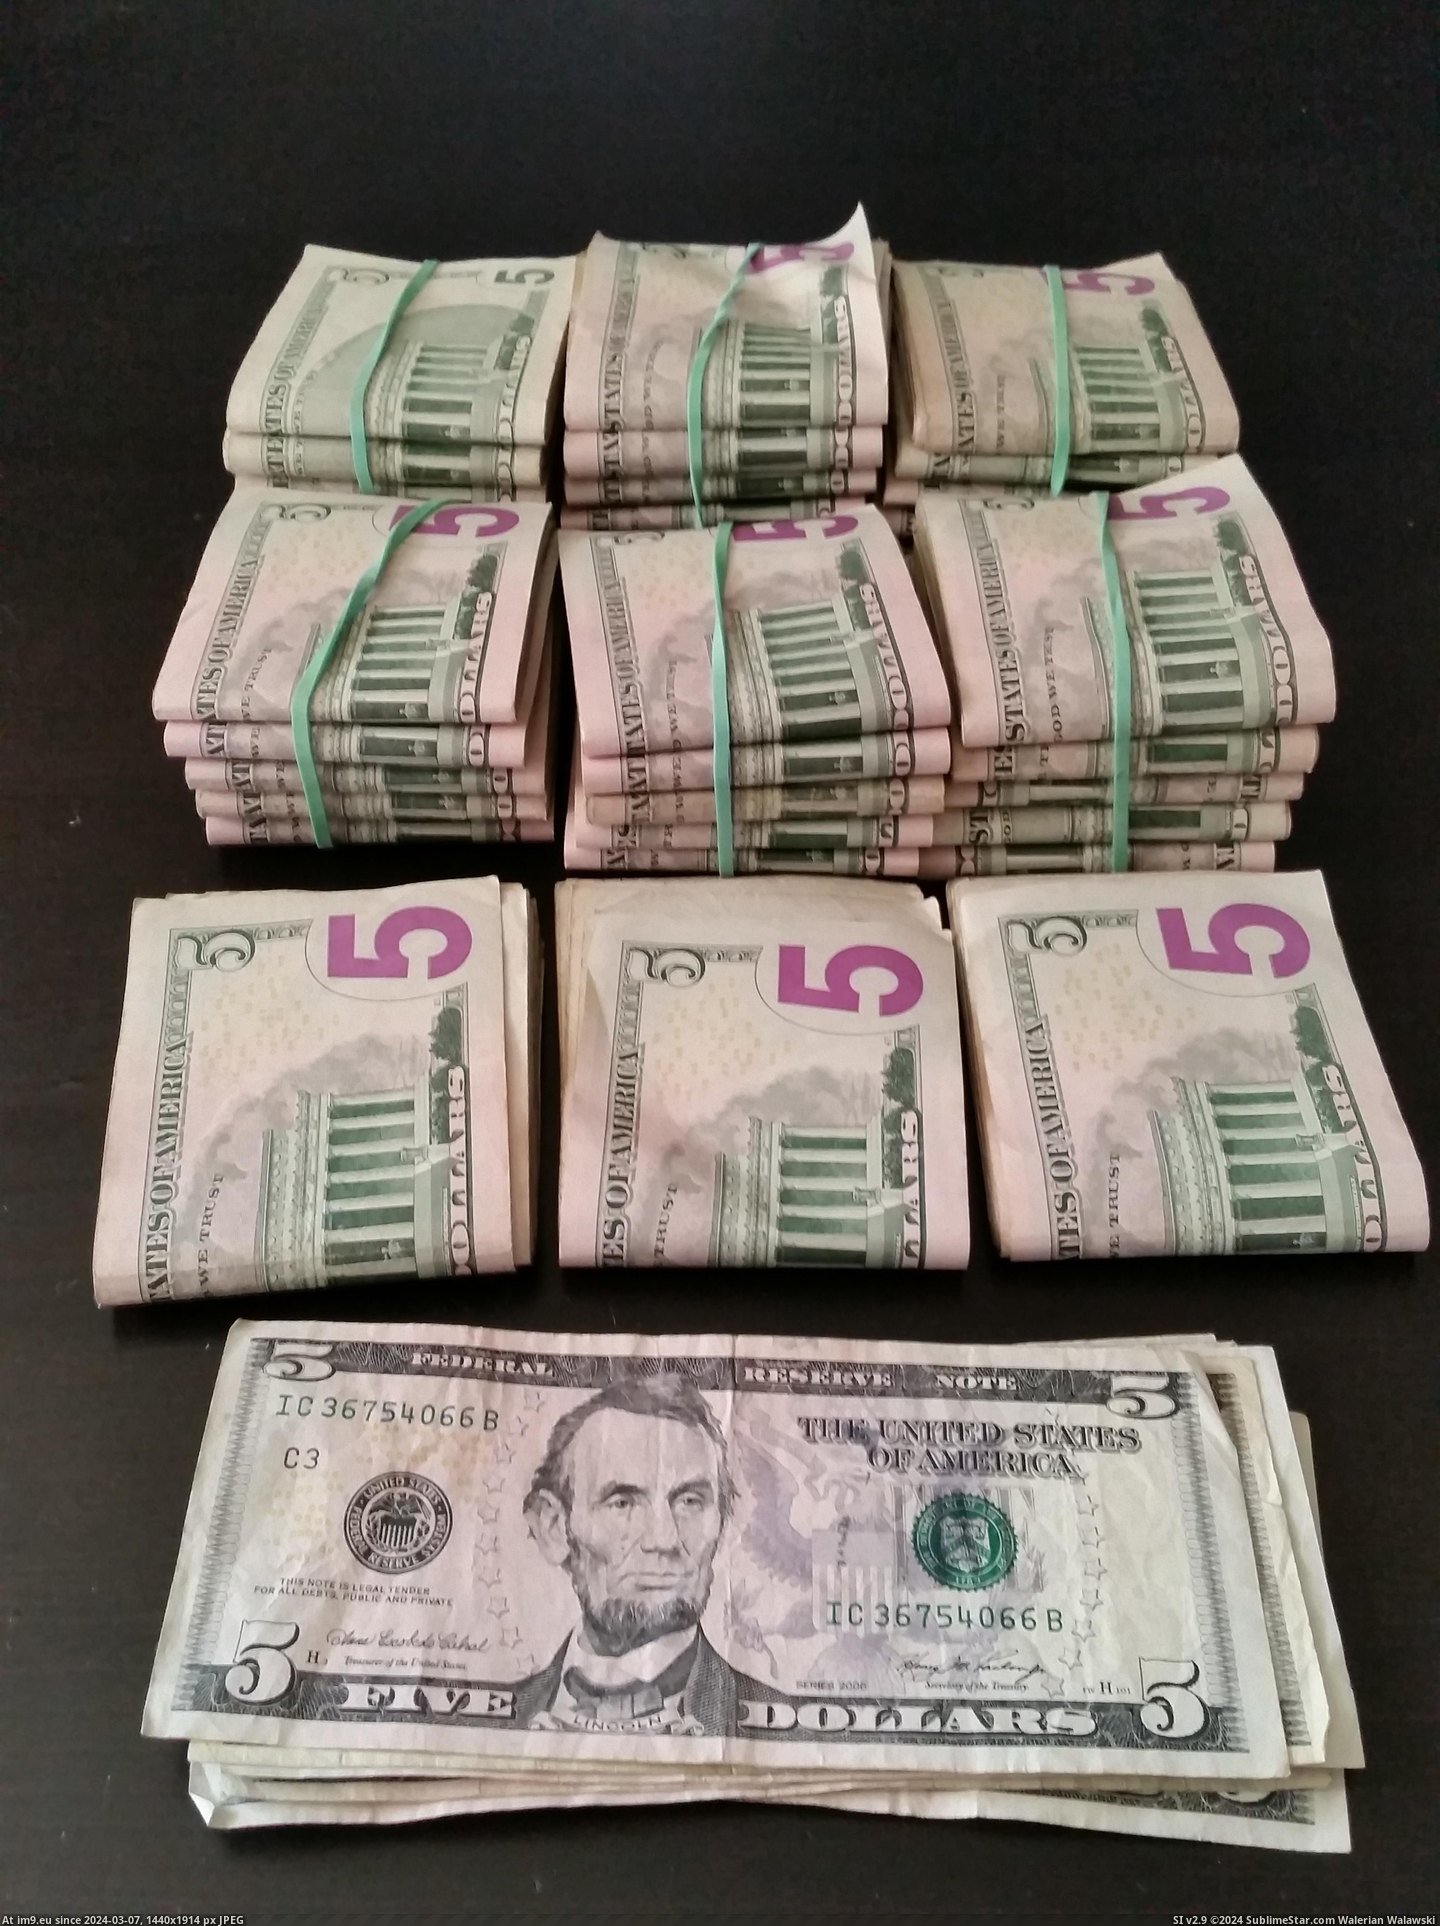 #For #Year #Put #Possession #Saved #Bill [Pics] For the past year, I put away every $5 bill that came into my possession. To date, I've saved $3,335. Pic. (Bild von album My r/PICS favs))